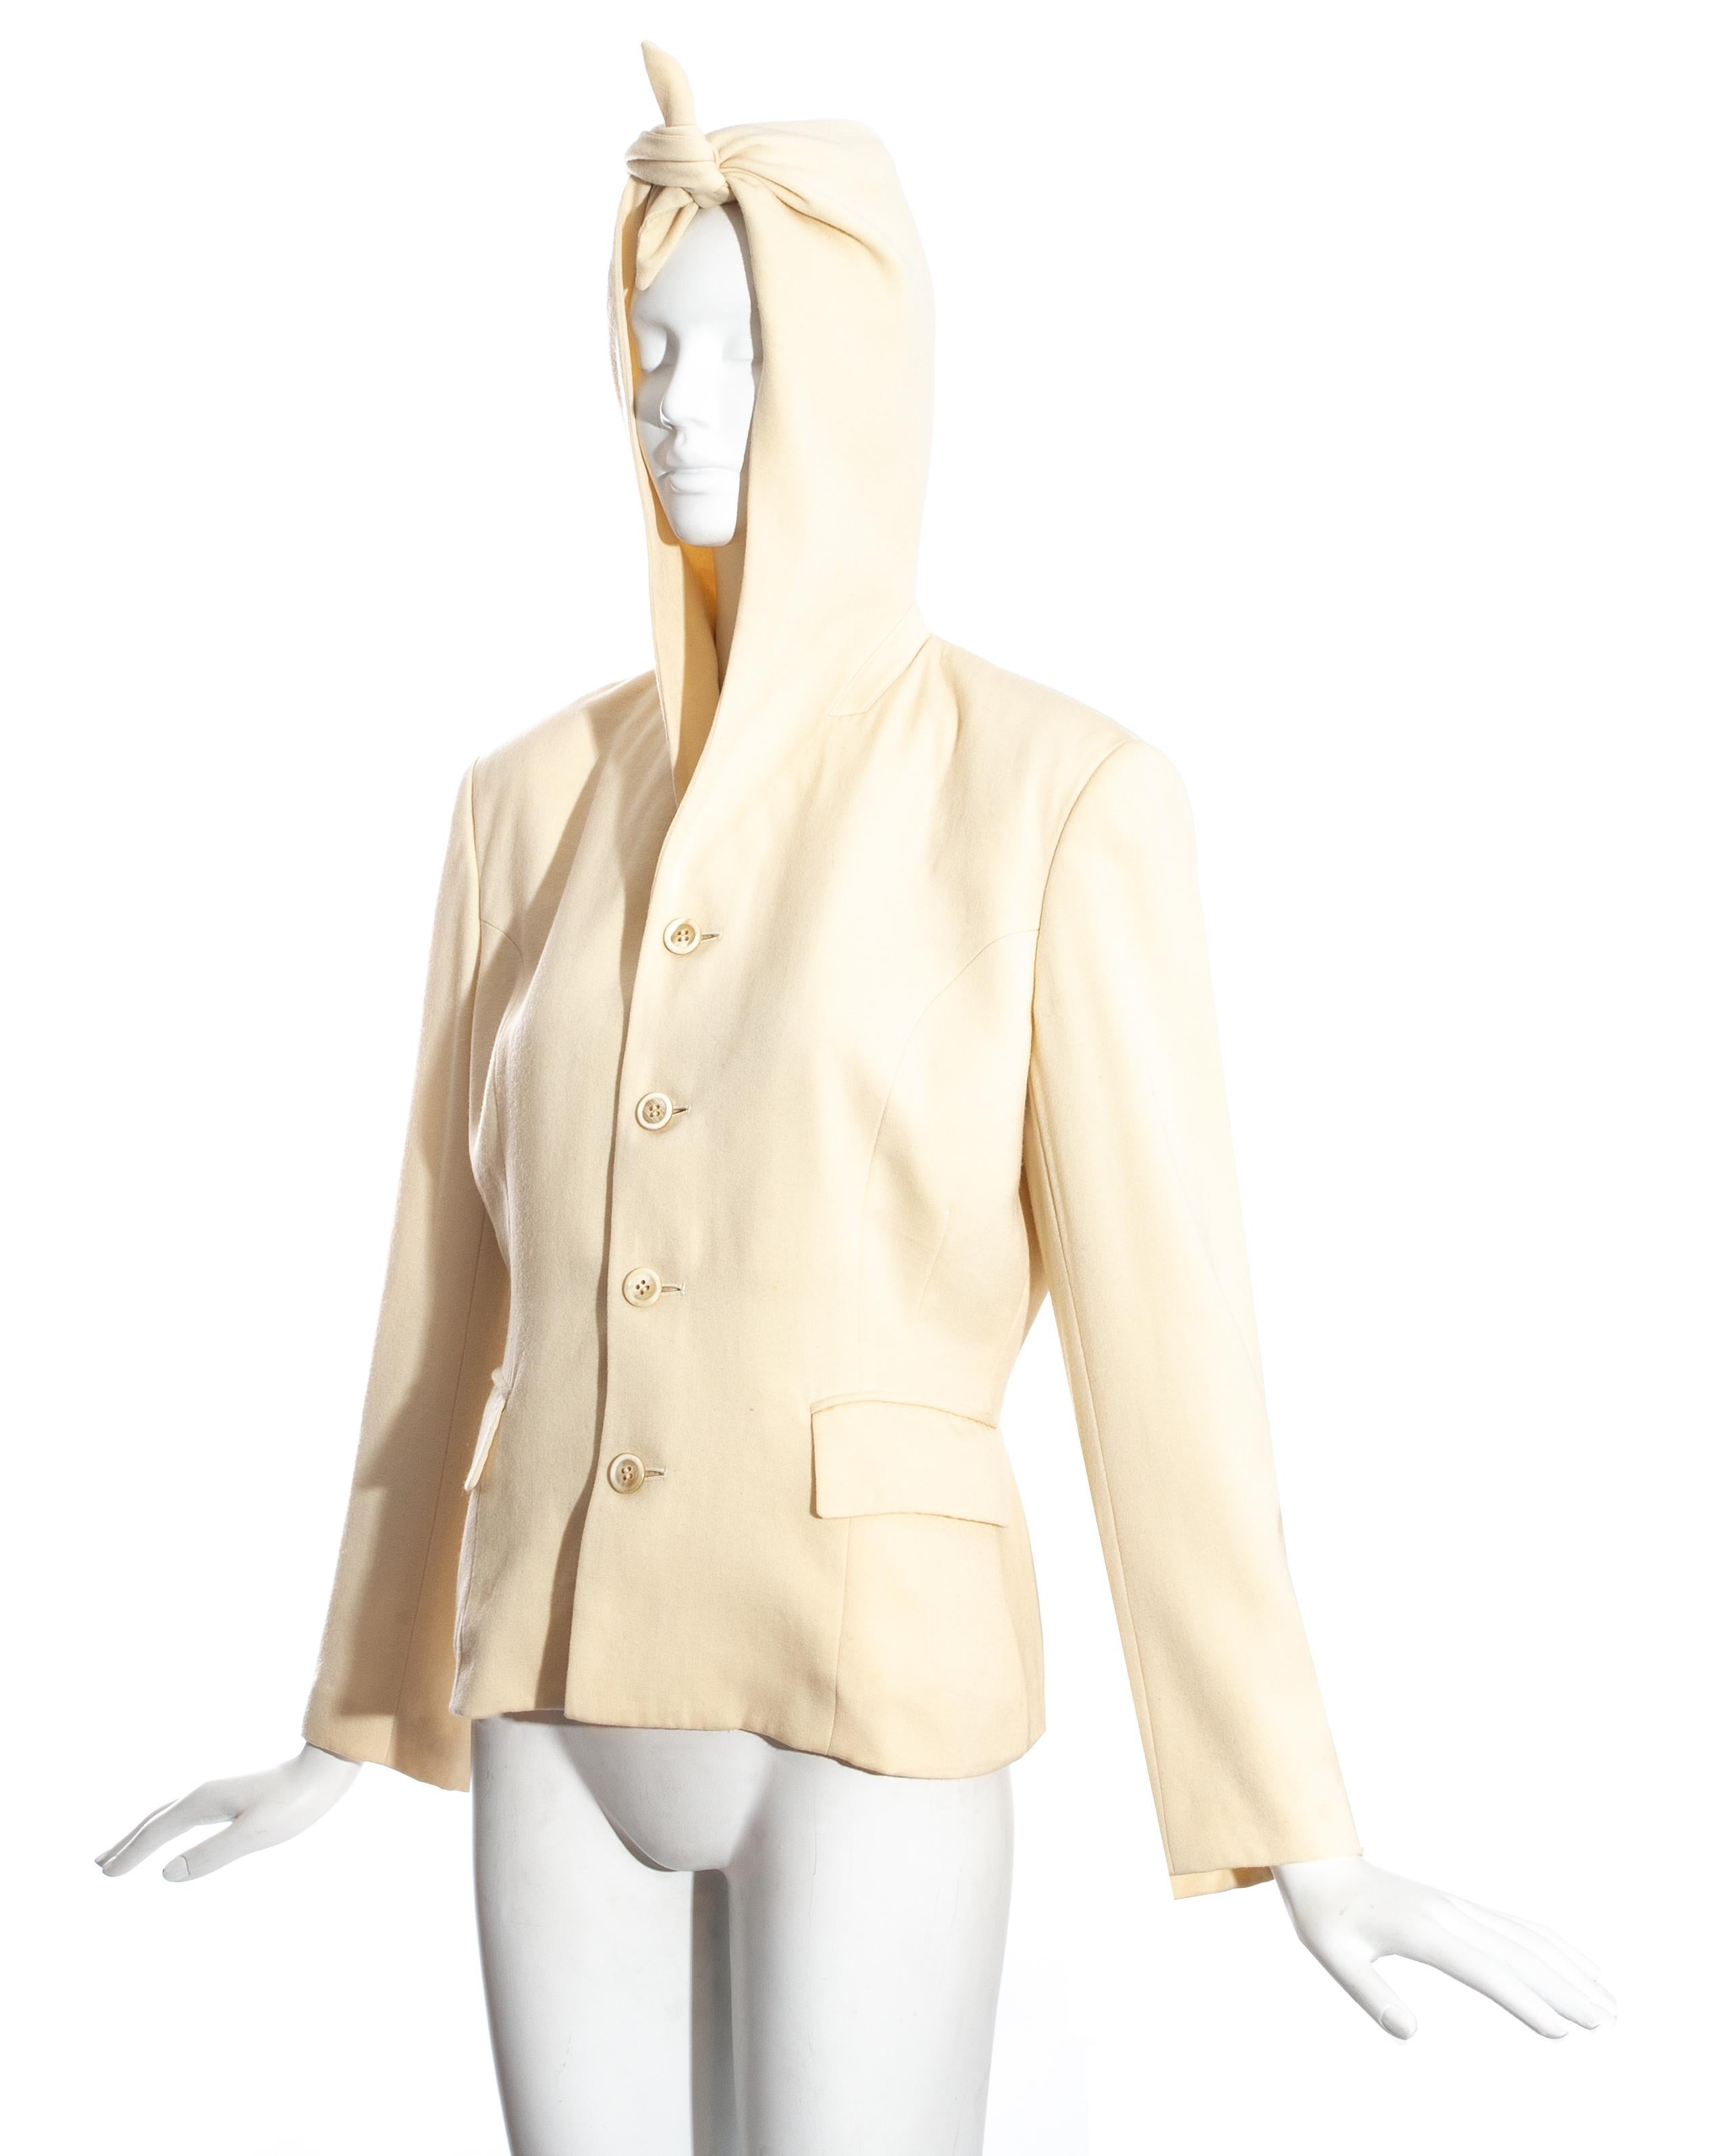 Comme des Garçons cream wool button up jacket with pointed hood which can be tied around the head or in a knot.

Fall-Winter 1988